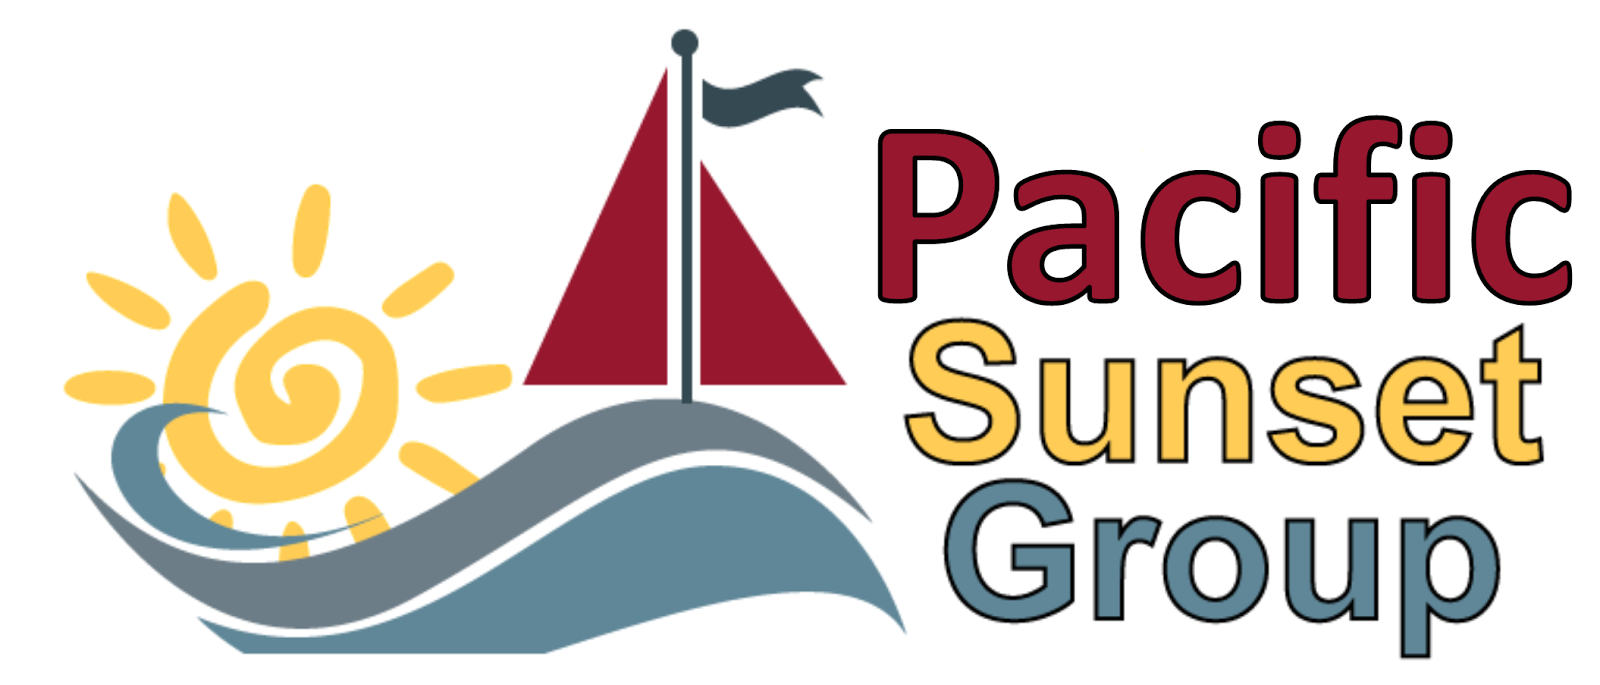 Pacific Sunset Group